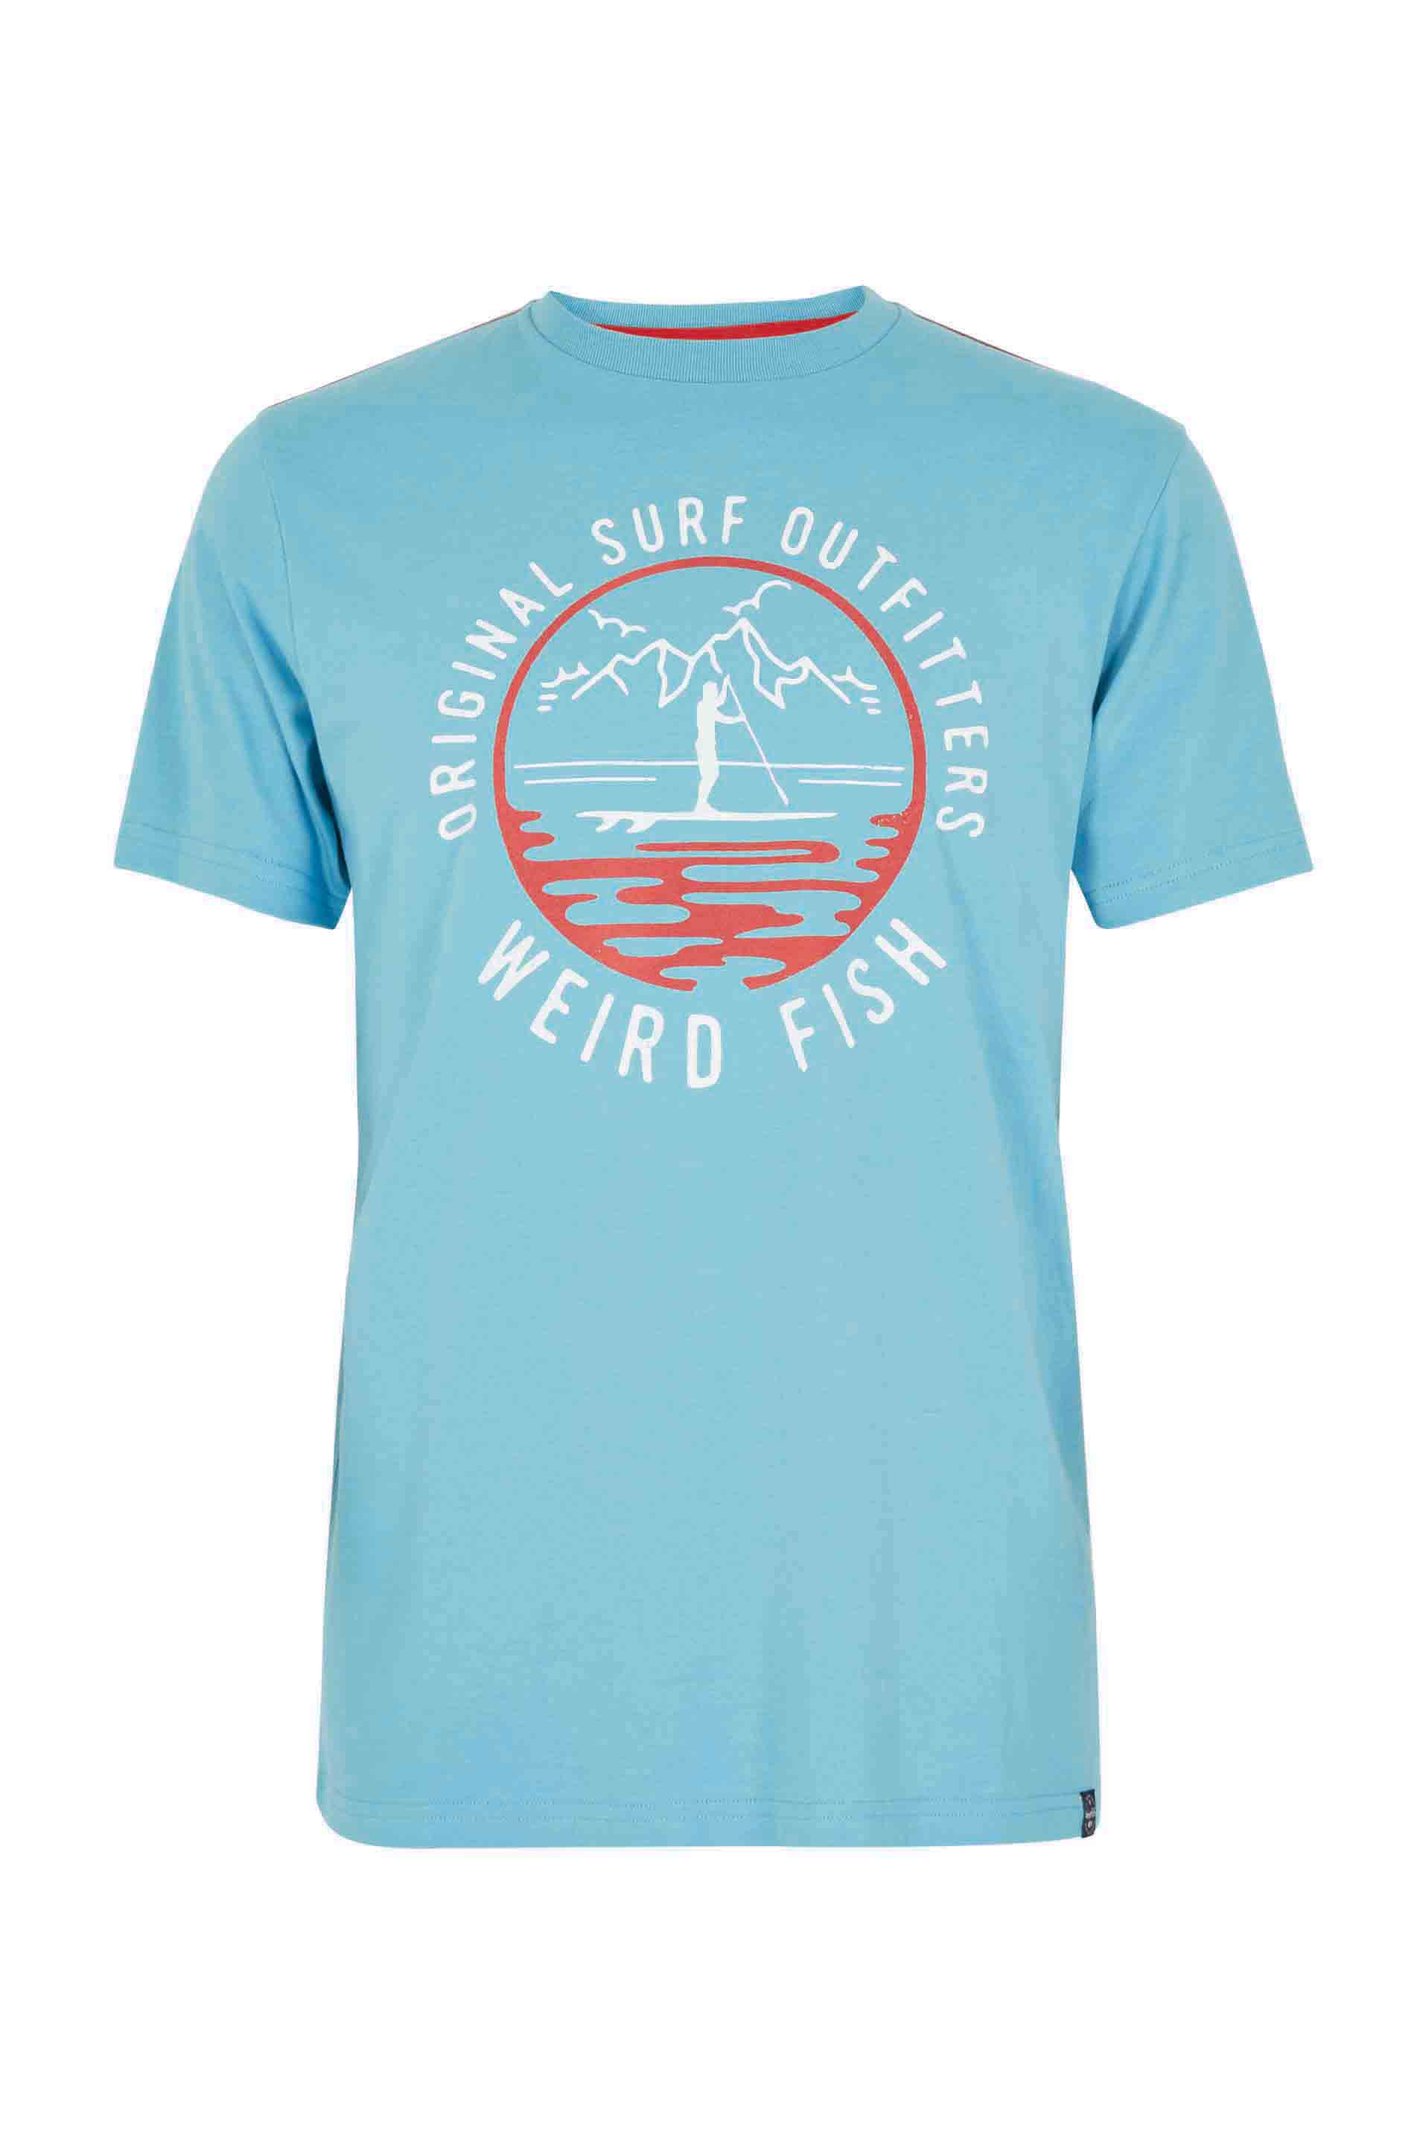 Weird Fish Paddle Eco Graphic T-Shirt Sky Blue Size S